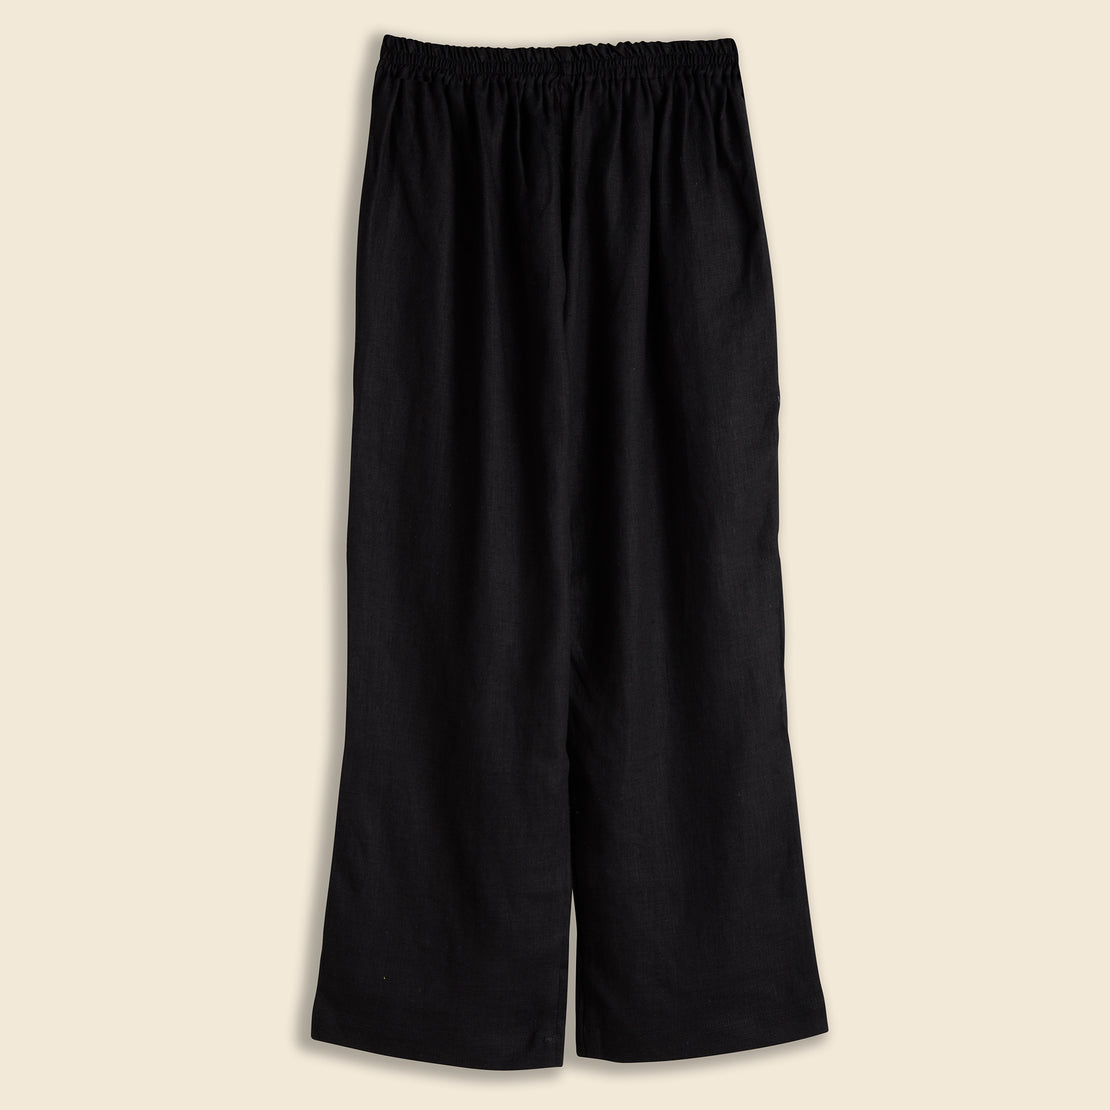 Tazzeka Pant - Black - Limo - STAG Provisions - W - Pants - Twill